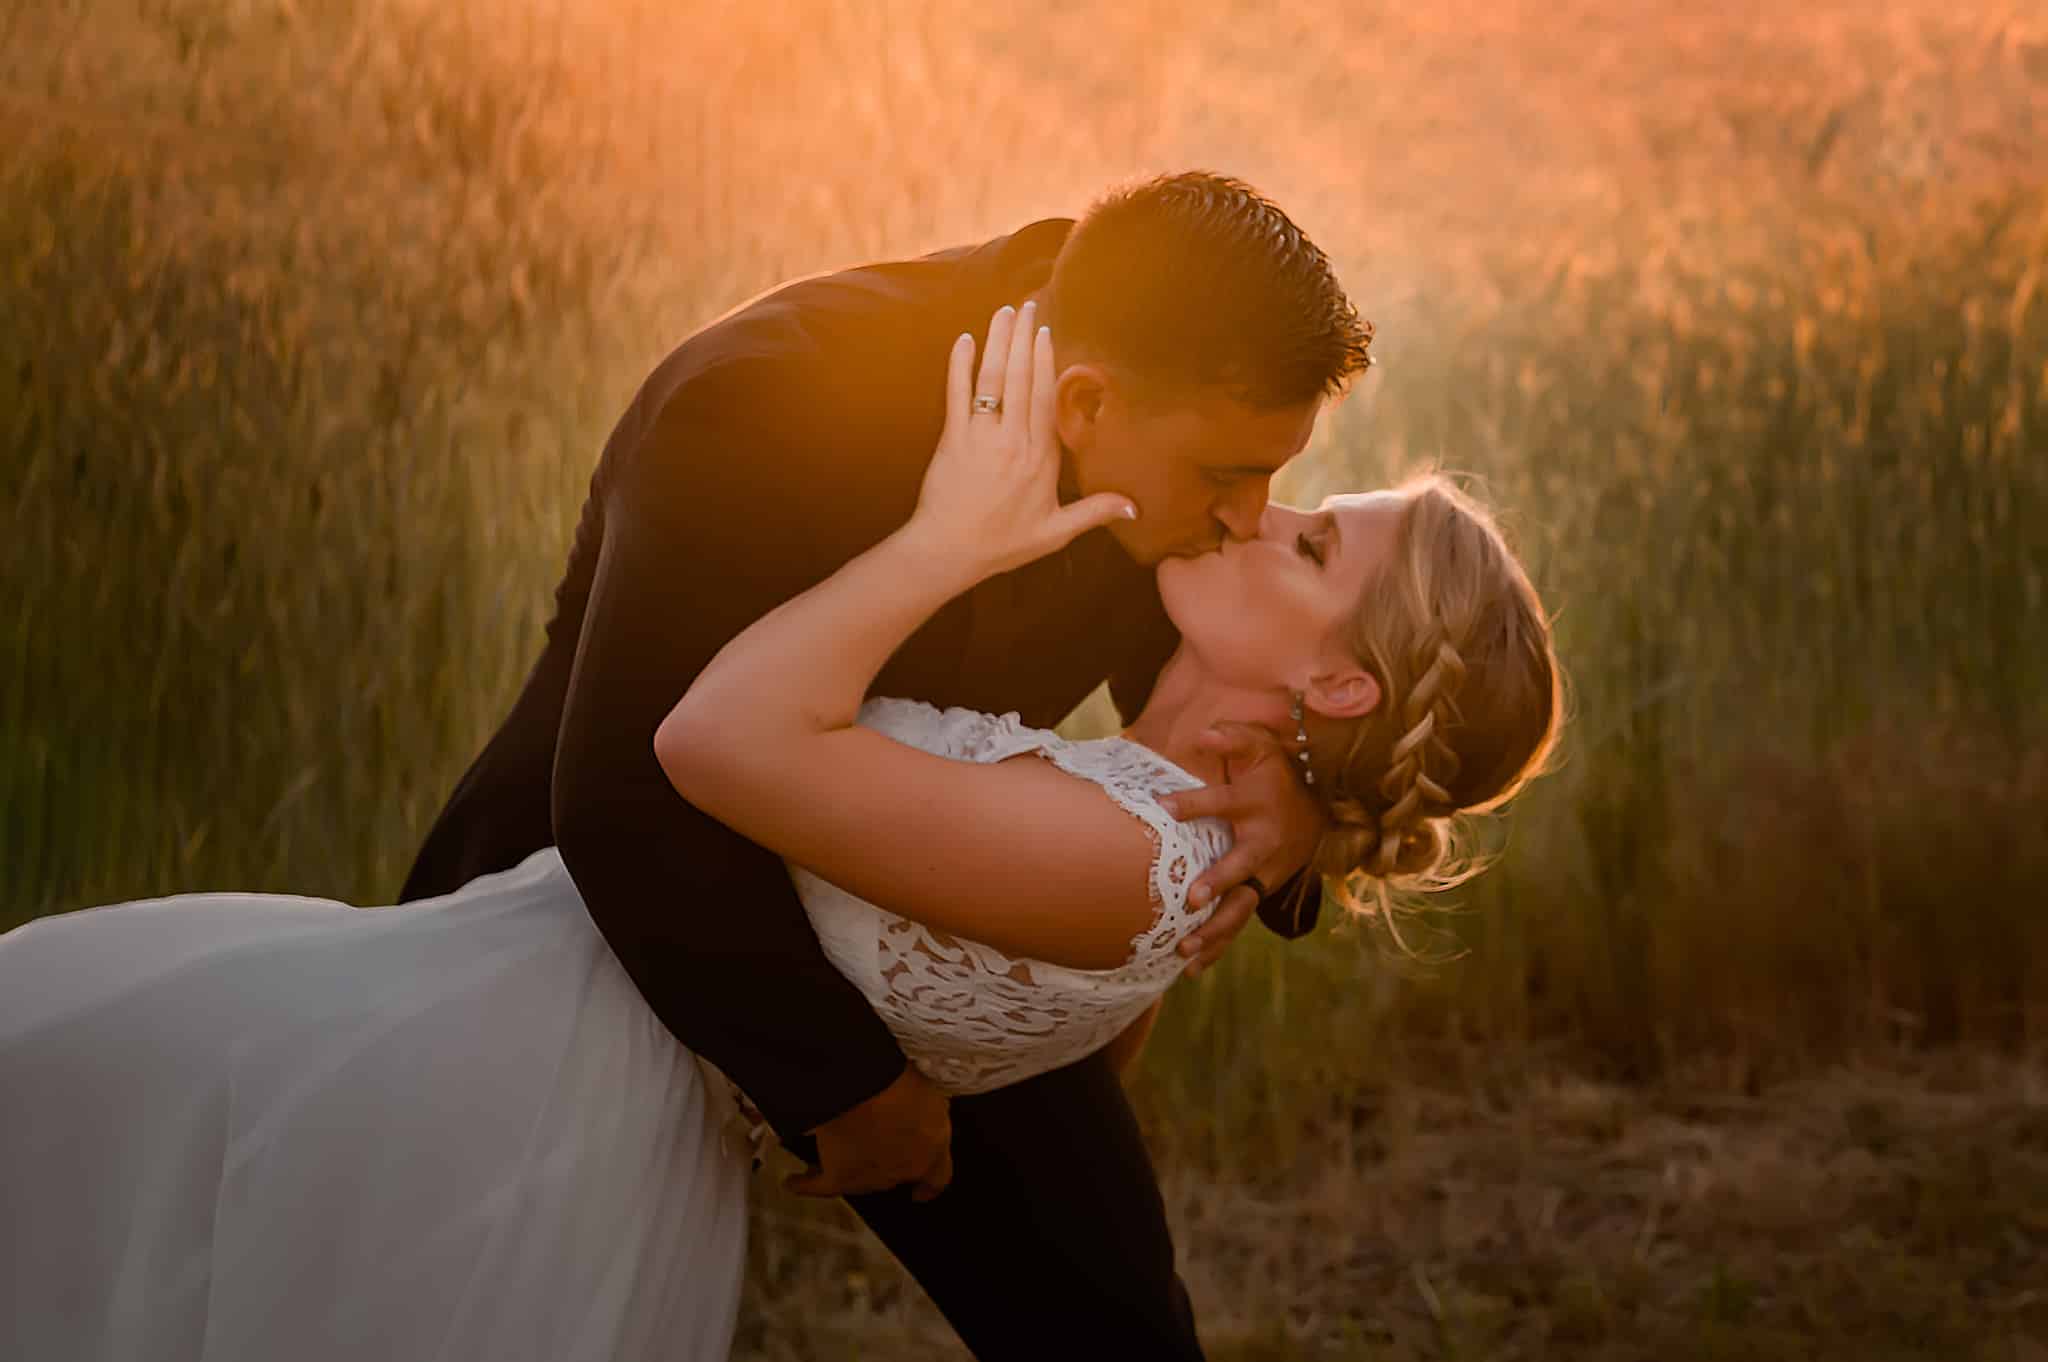 The groom dips the bride in the prairie grass as the setting sun gives a soft lens flare to the scene.